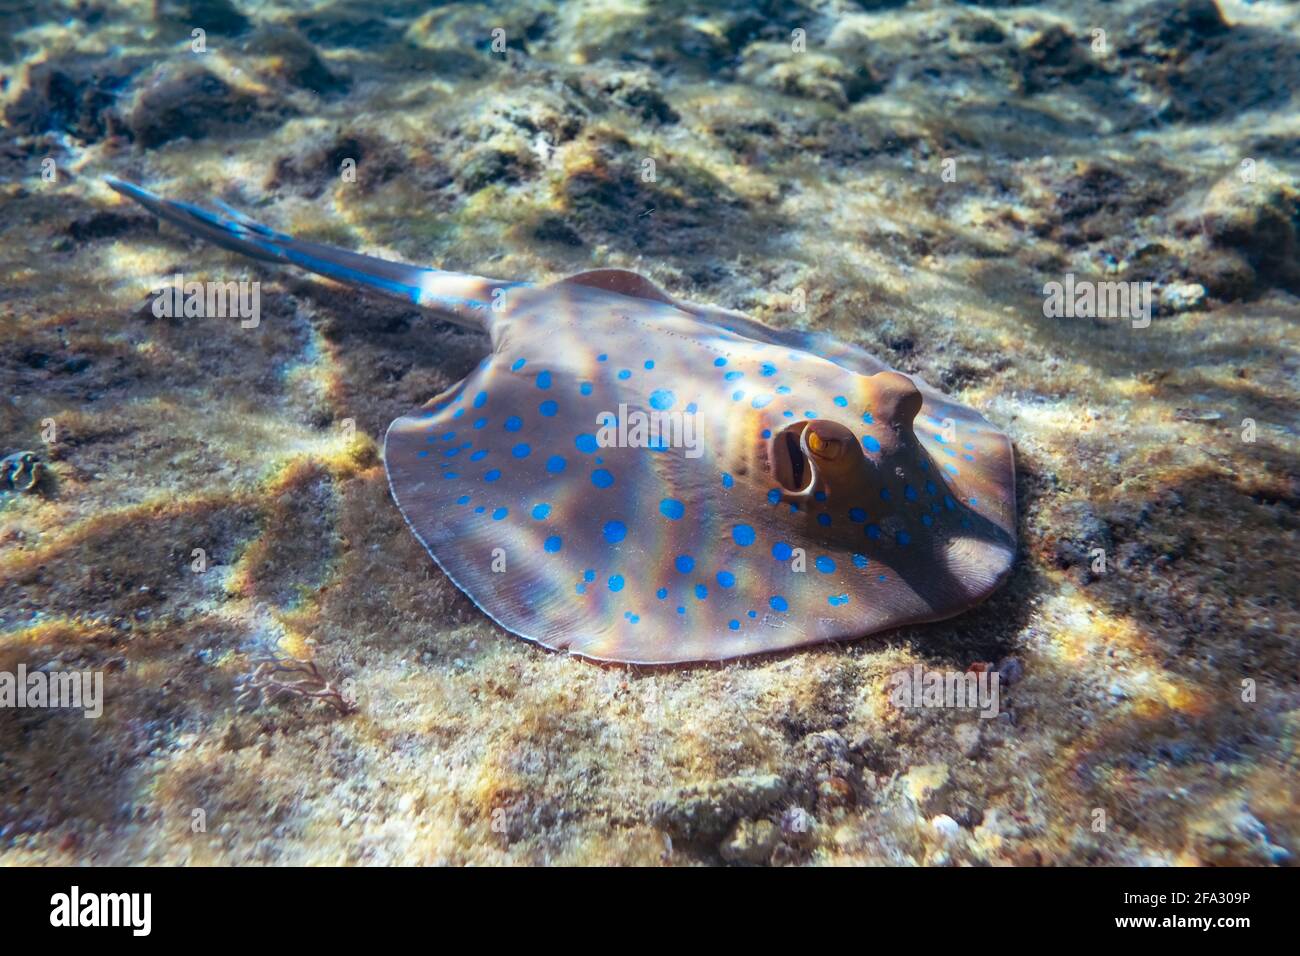 Blue spotted Stingray on sand bootom in the Red Sea Stock Photo